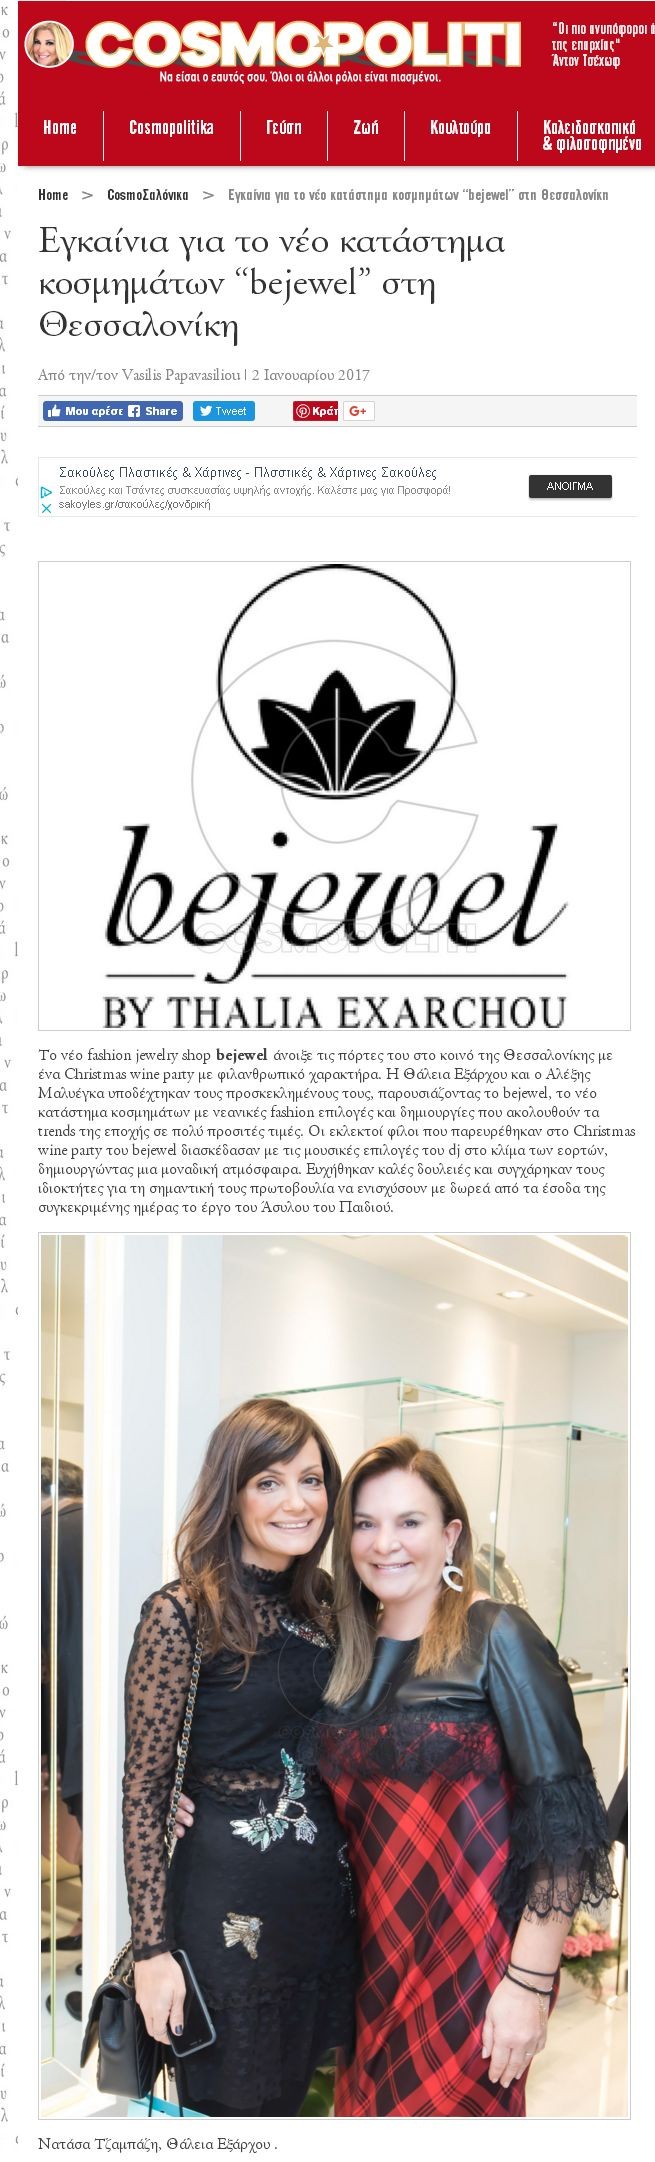 Bejewel by Thalia Exarchou Opening